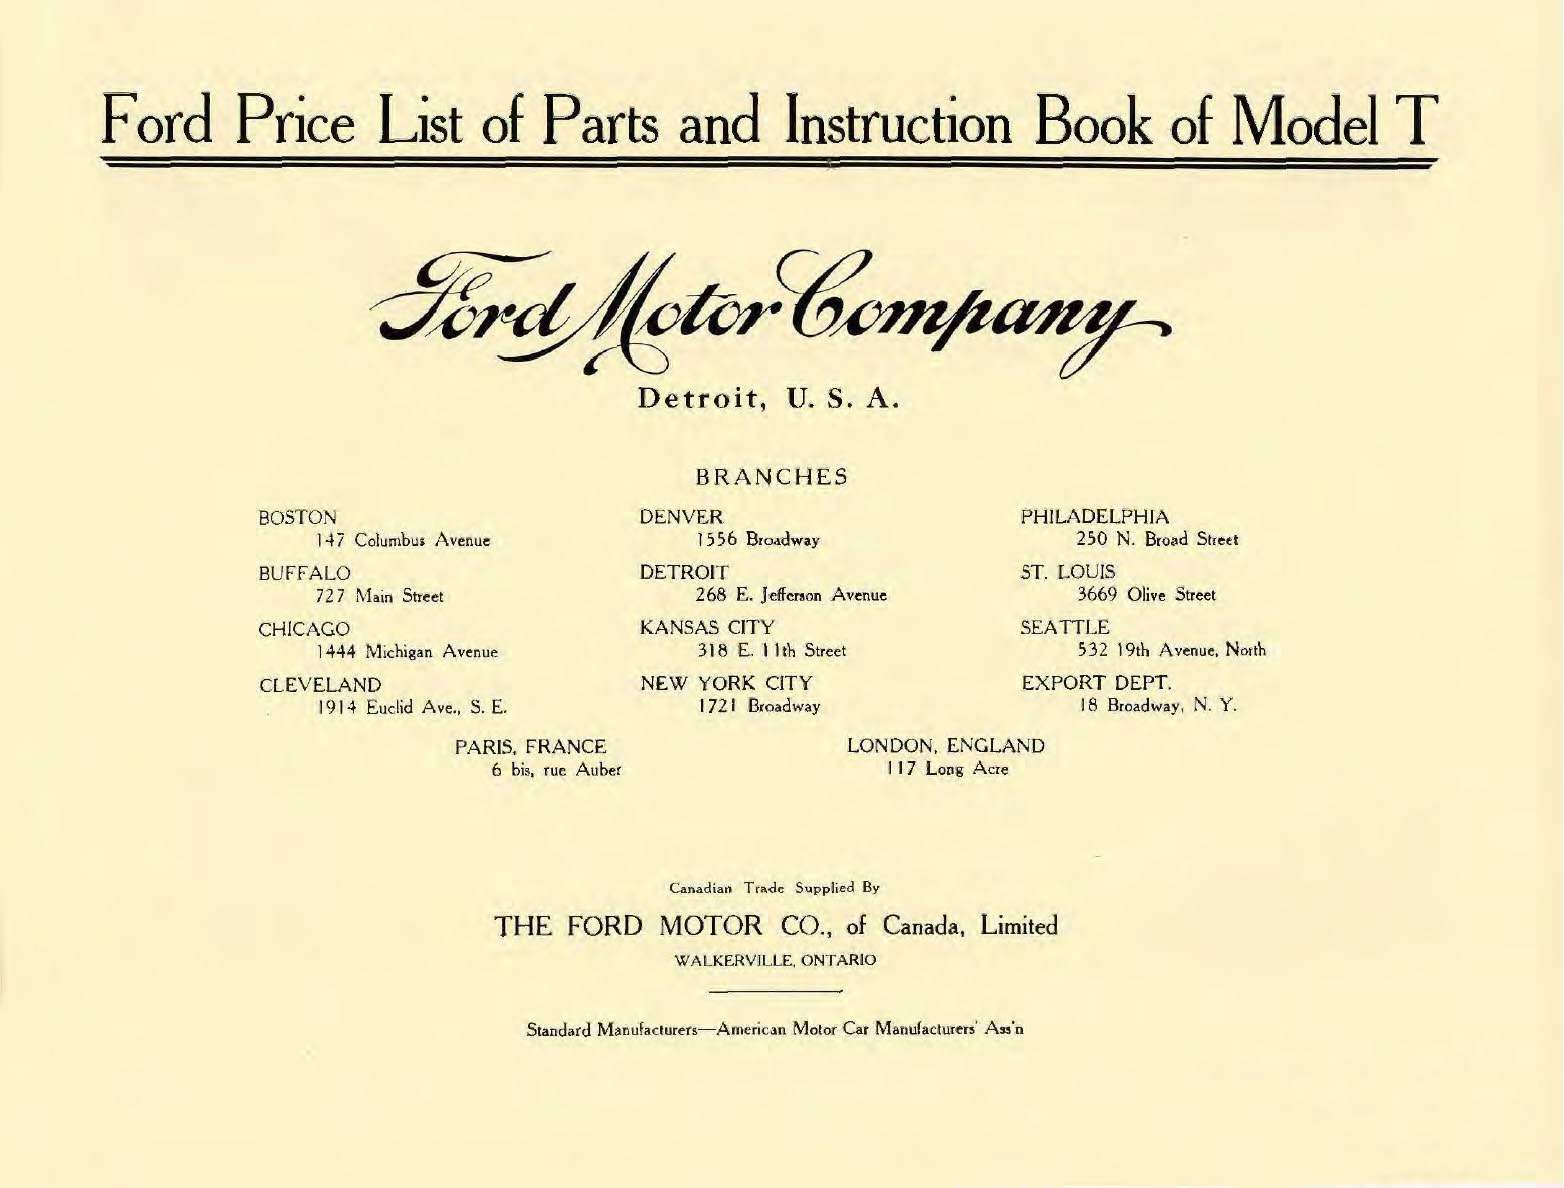 1909_Ford_Model_T_Price_List-03